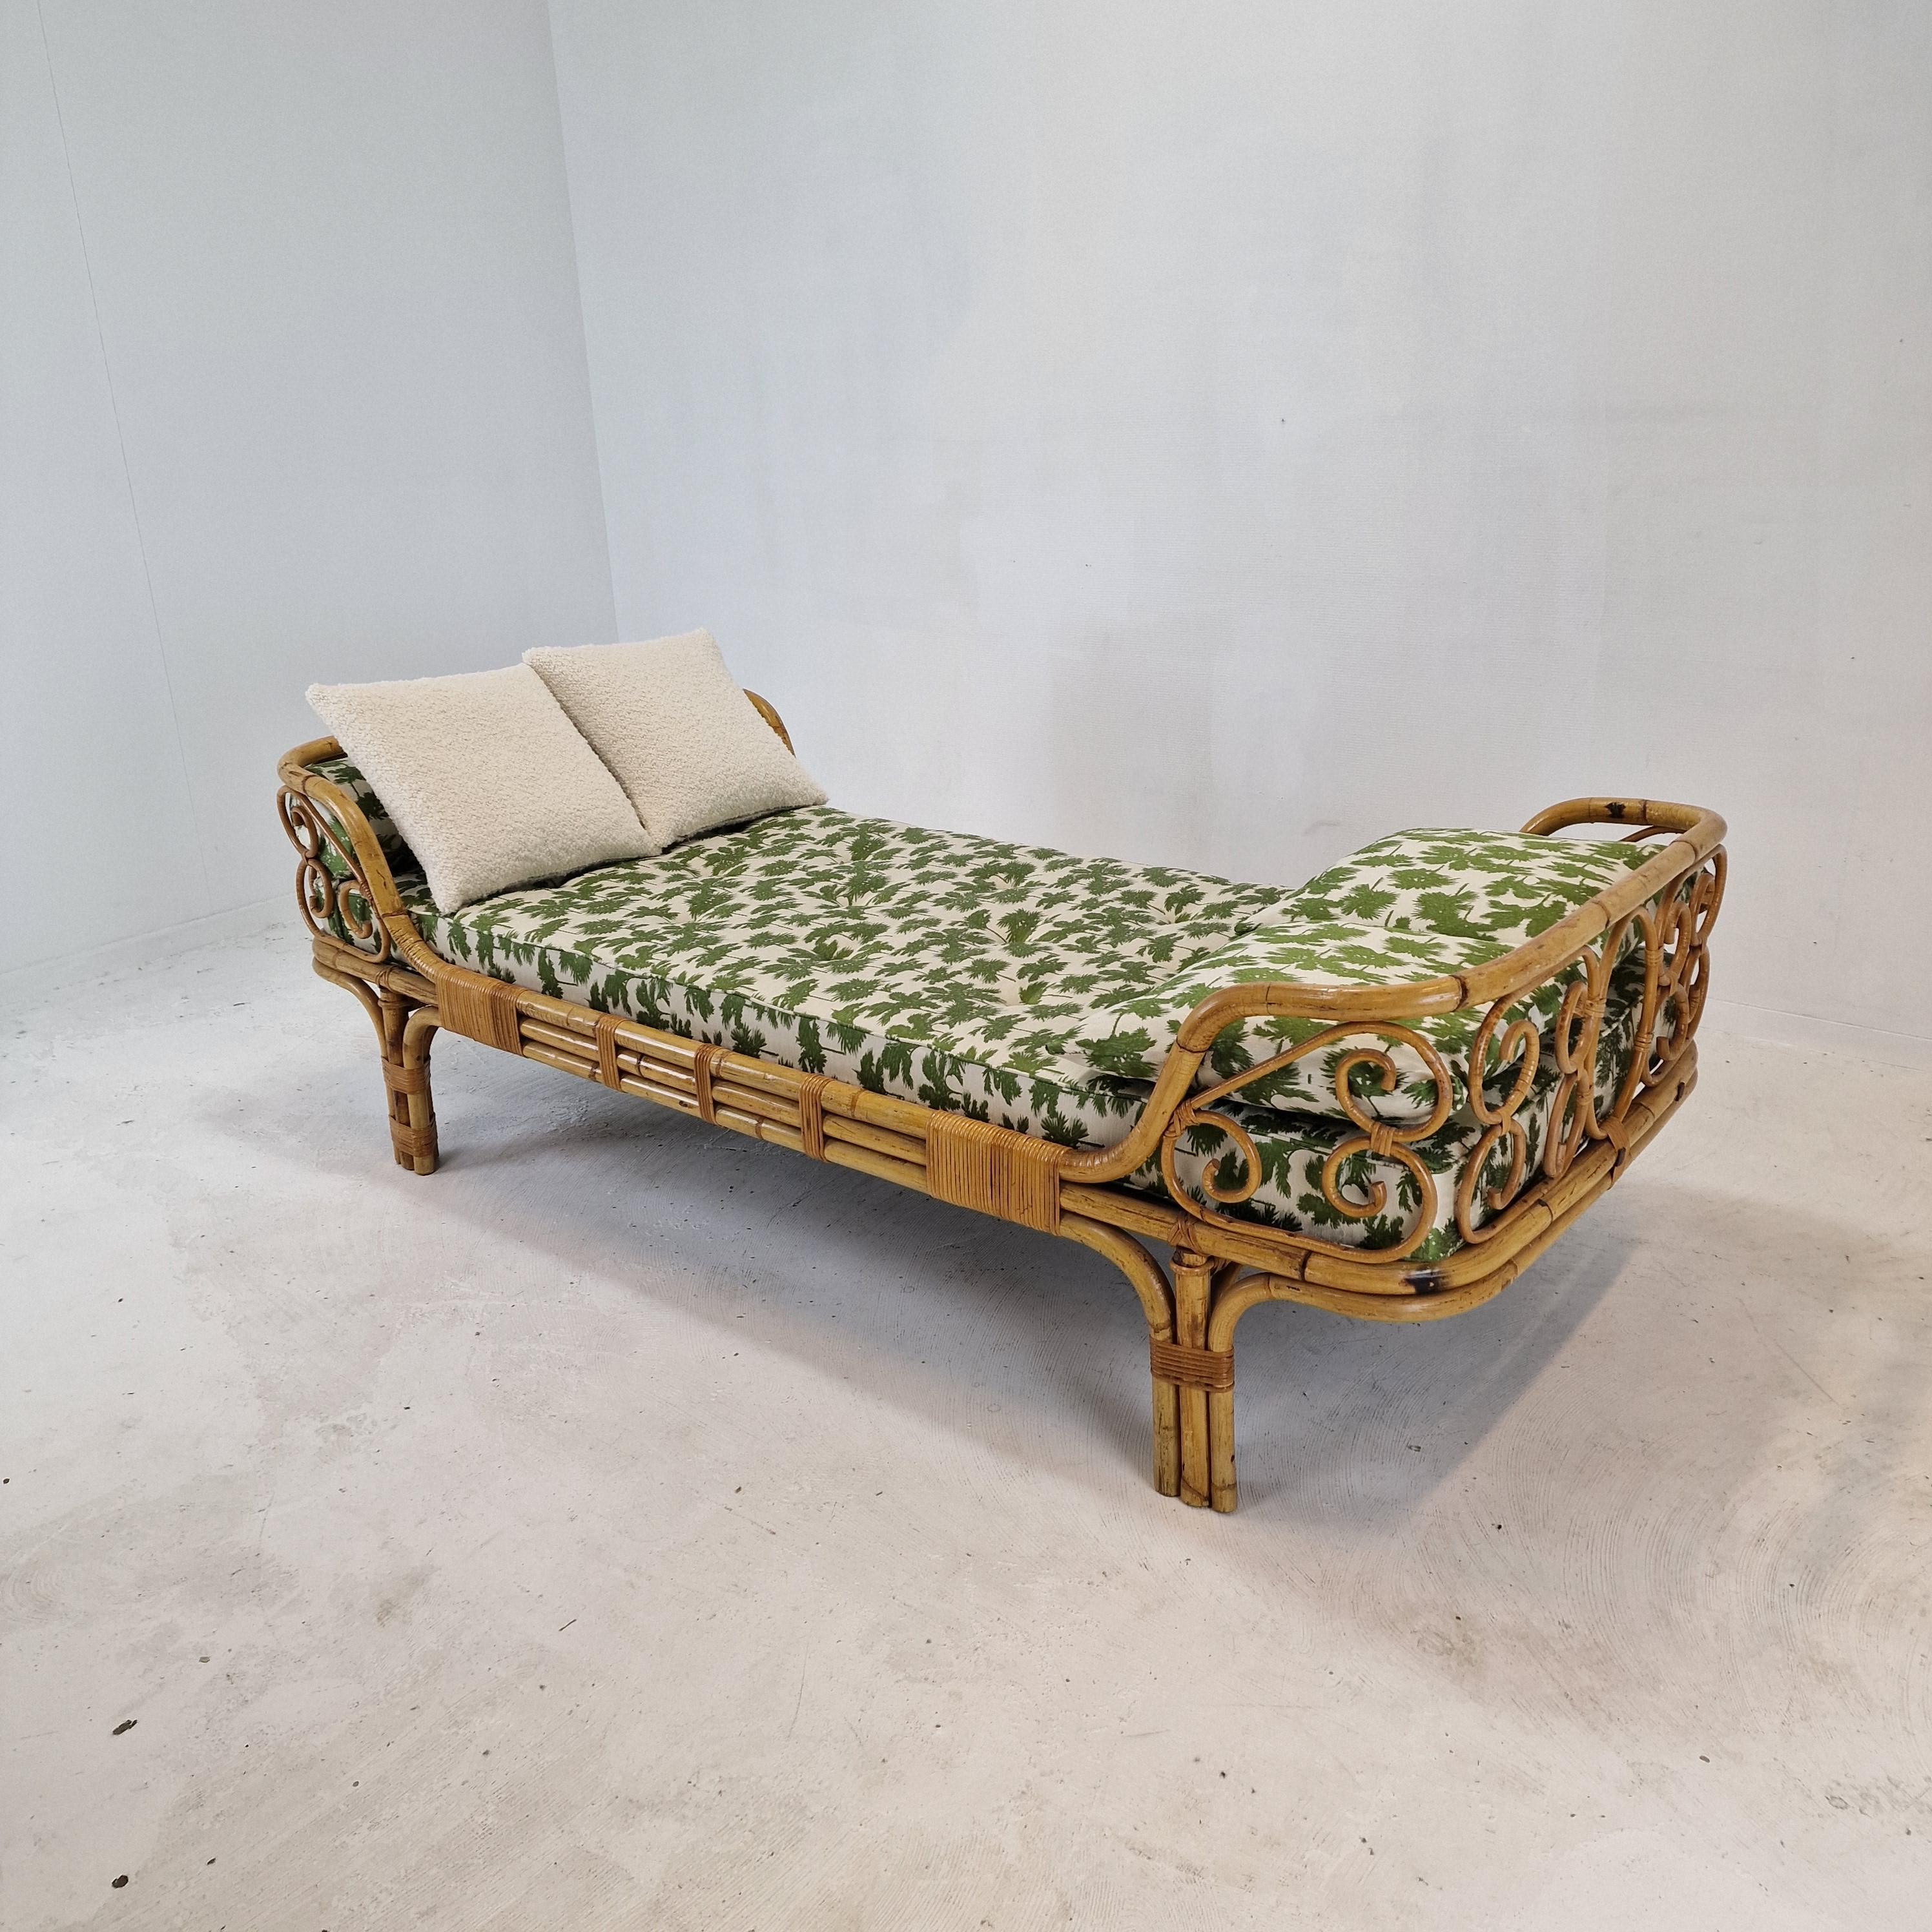 Woven Mid-Century Modern Italian Bamboo Daybed, 1960s For Sale